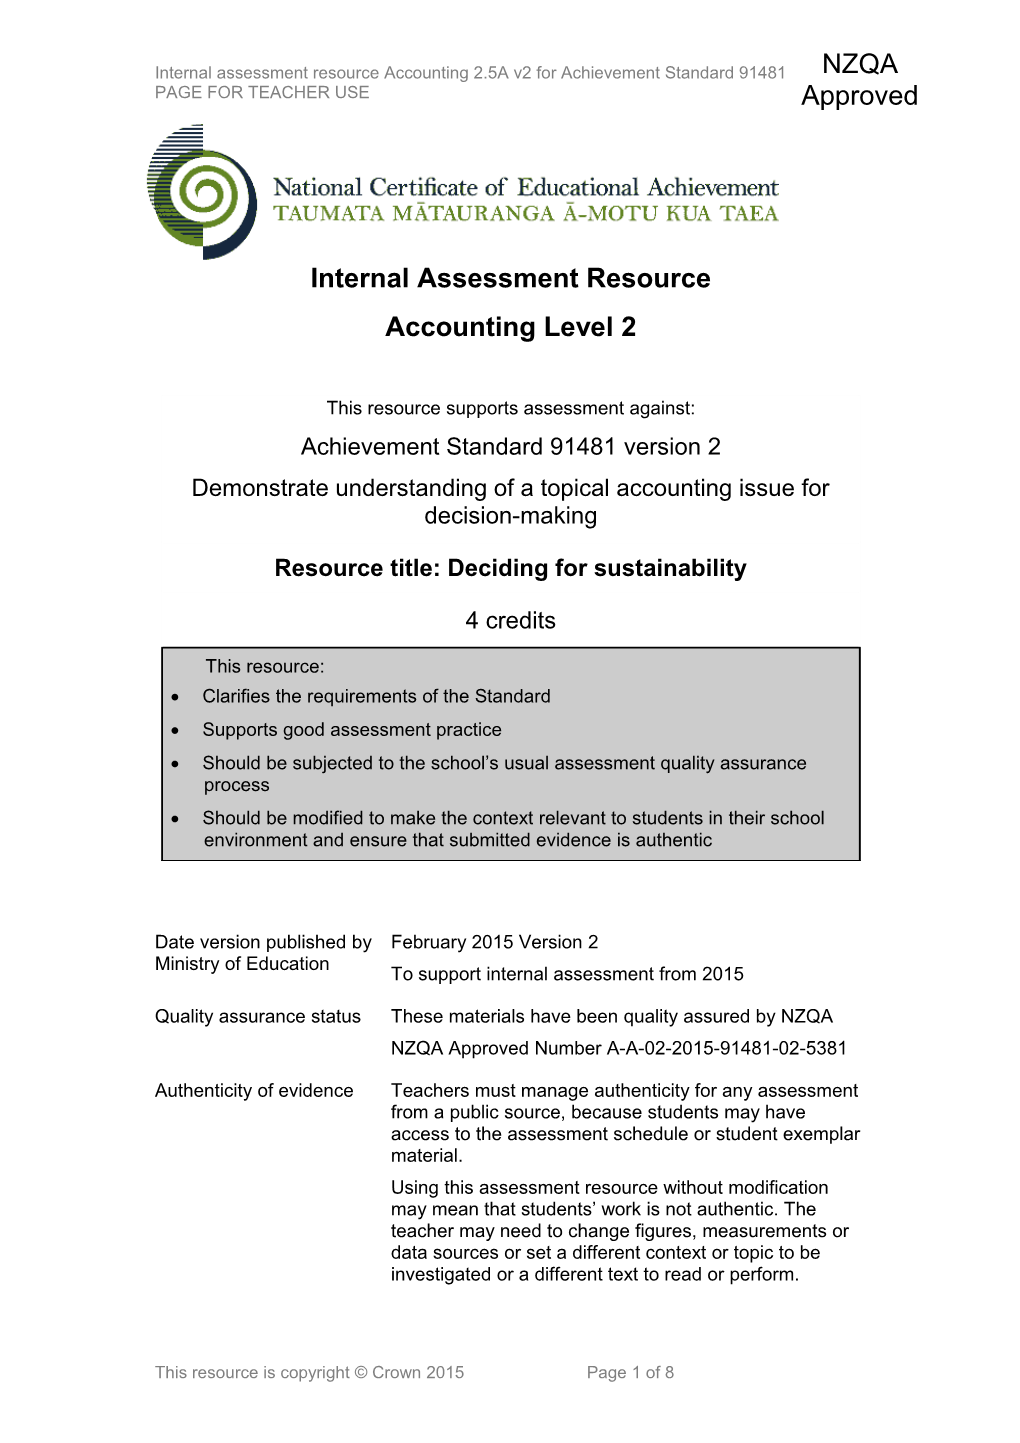 Level 2 Accounting Internal Assessment Resource